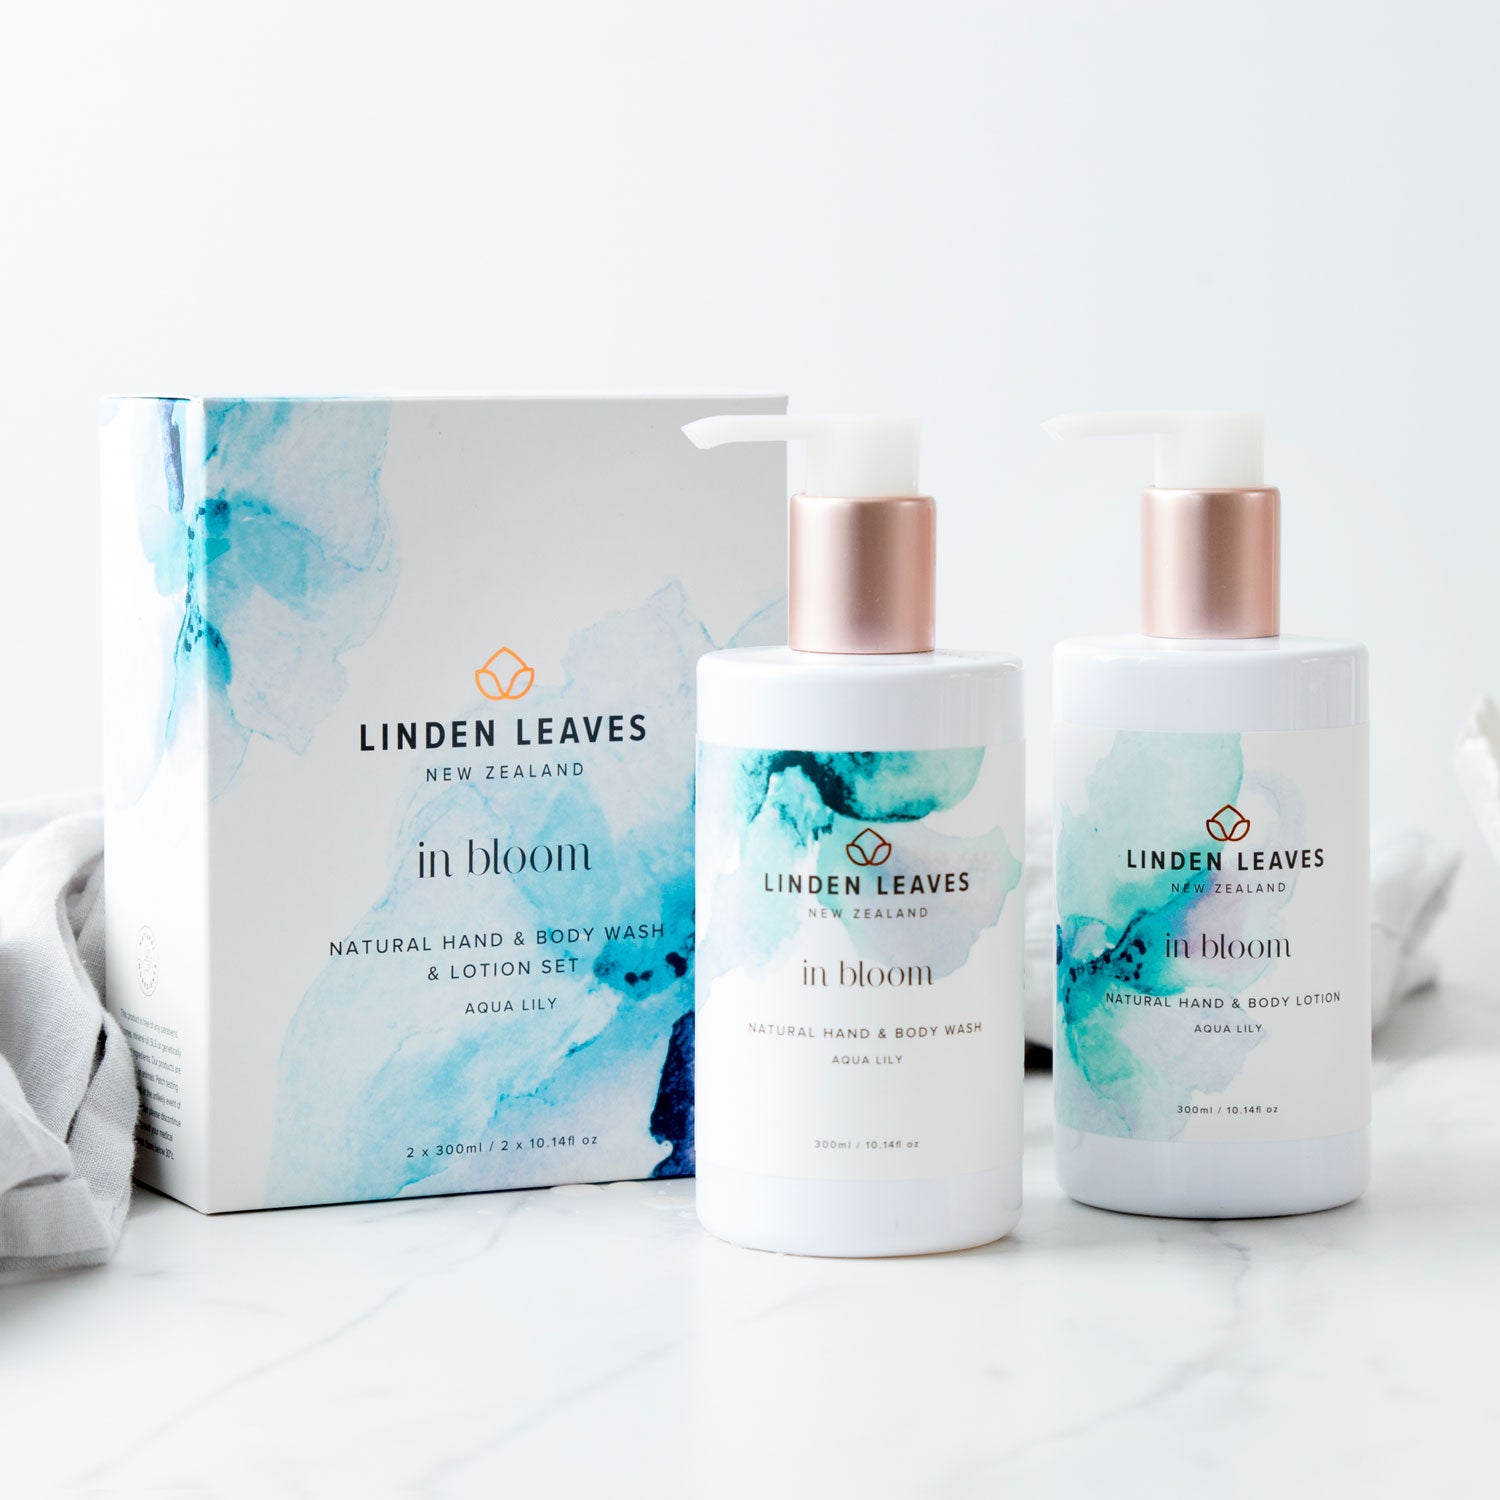 Linden Leaves Aqua Lily Hand & Body Wash & Lotion Boxed Set.